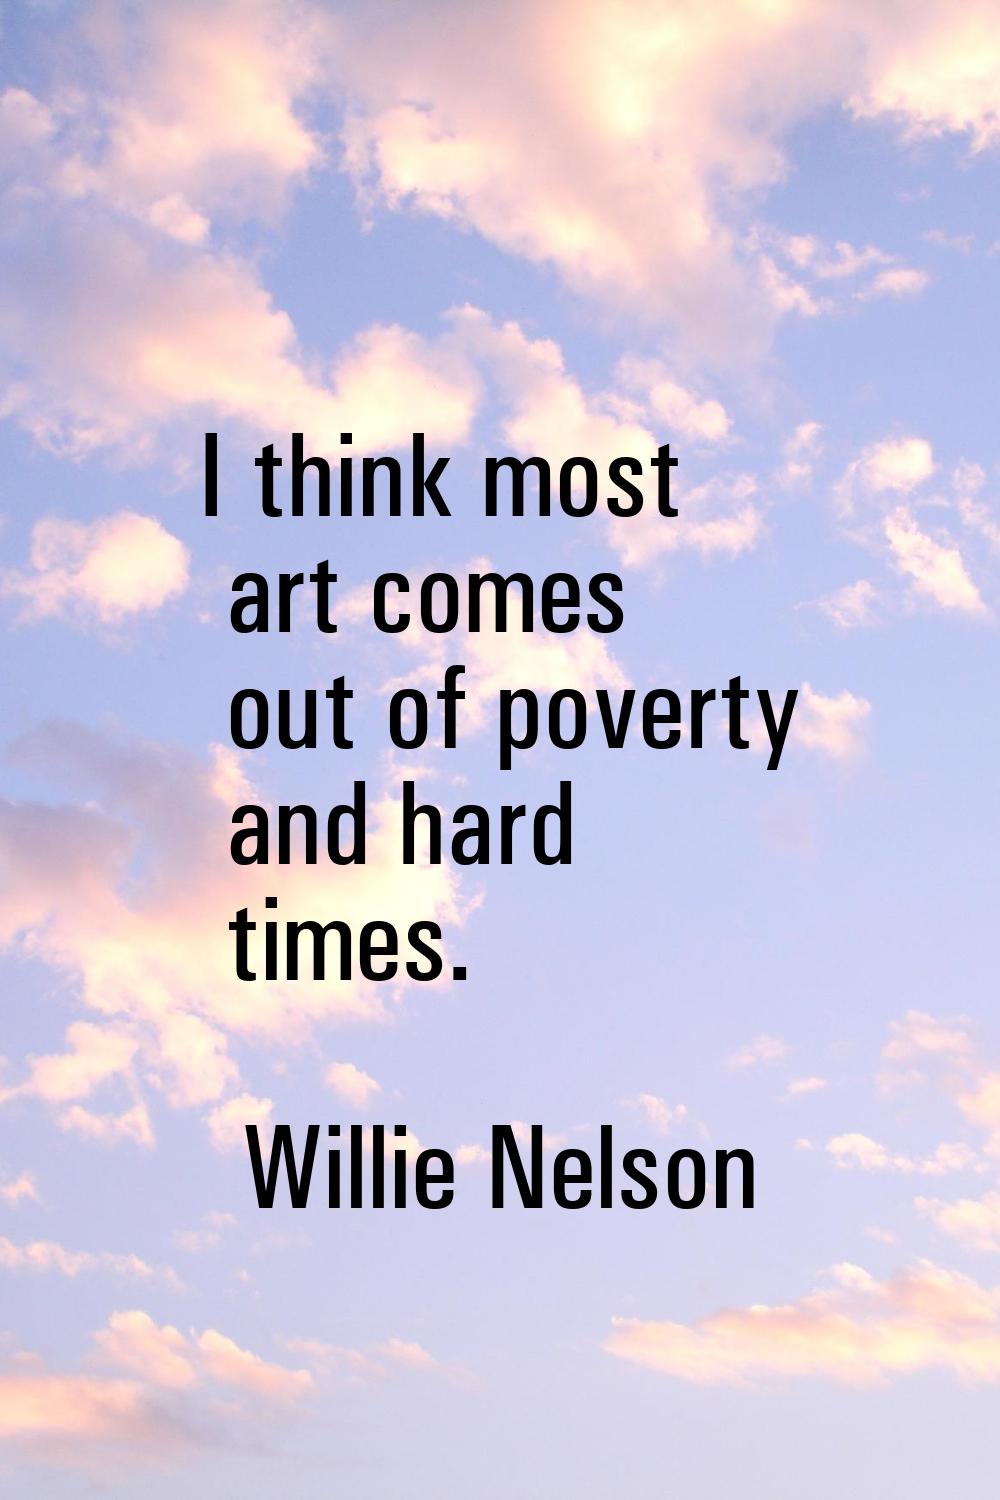 I think most art comes out of poverty and hard times.